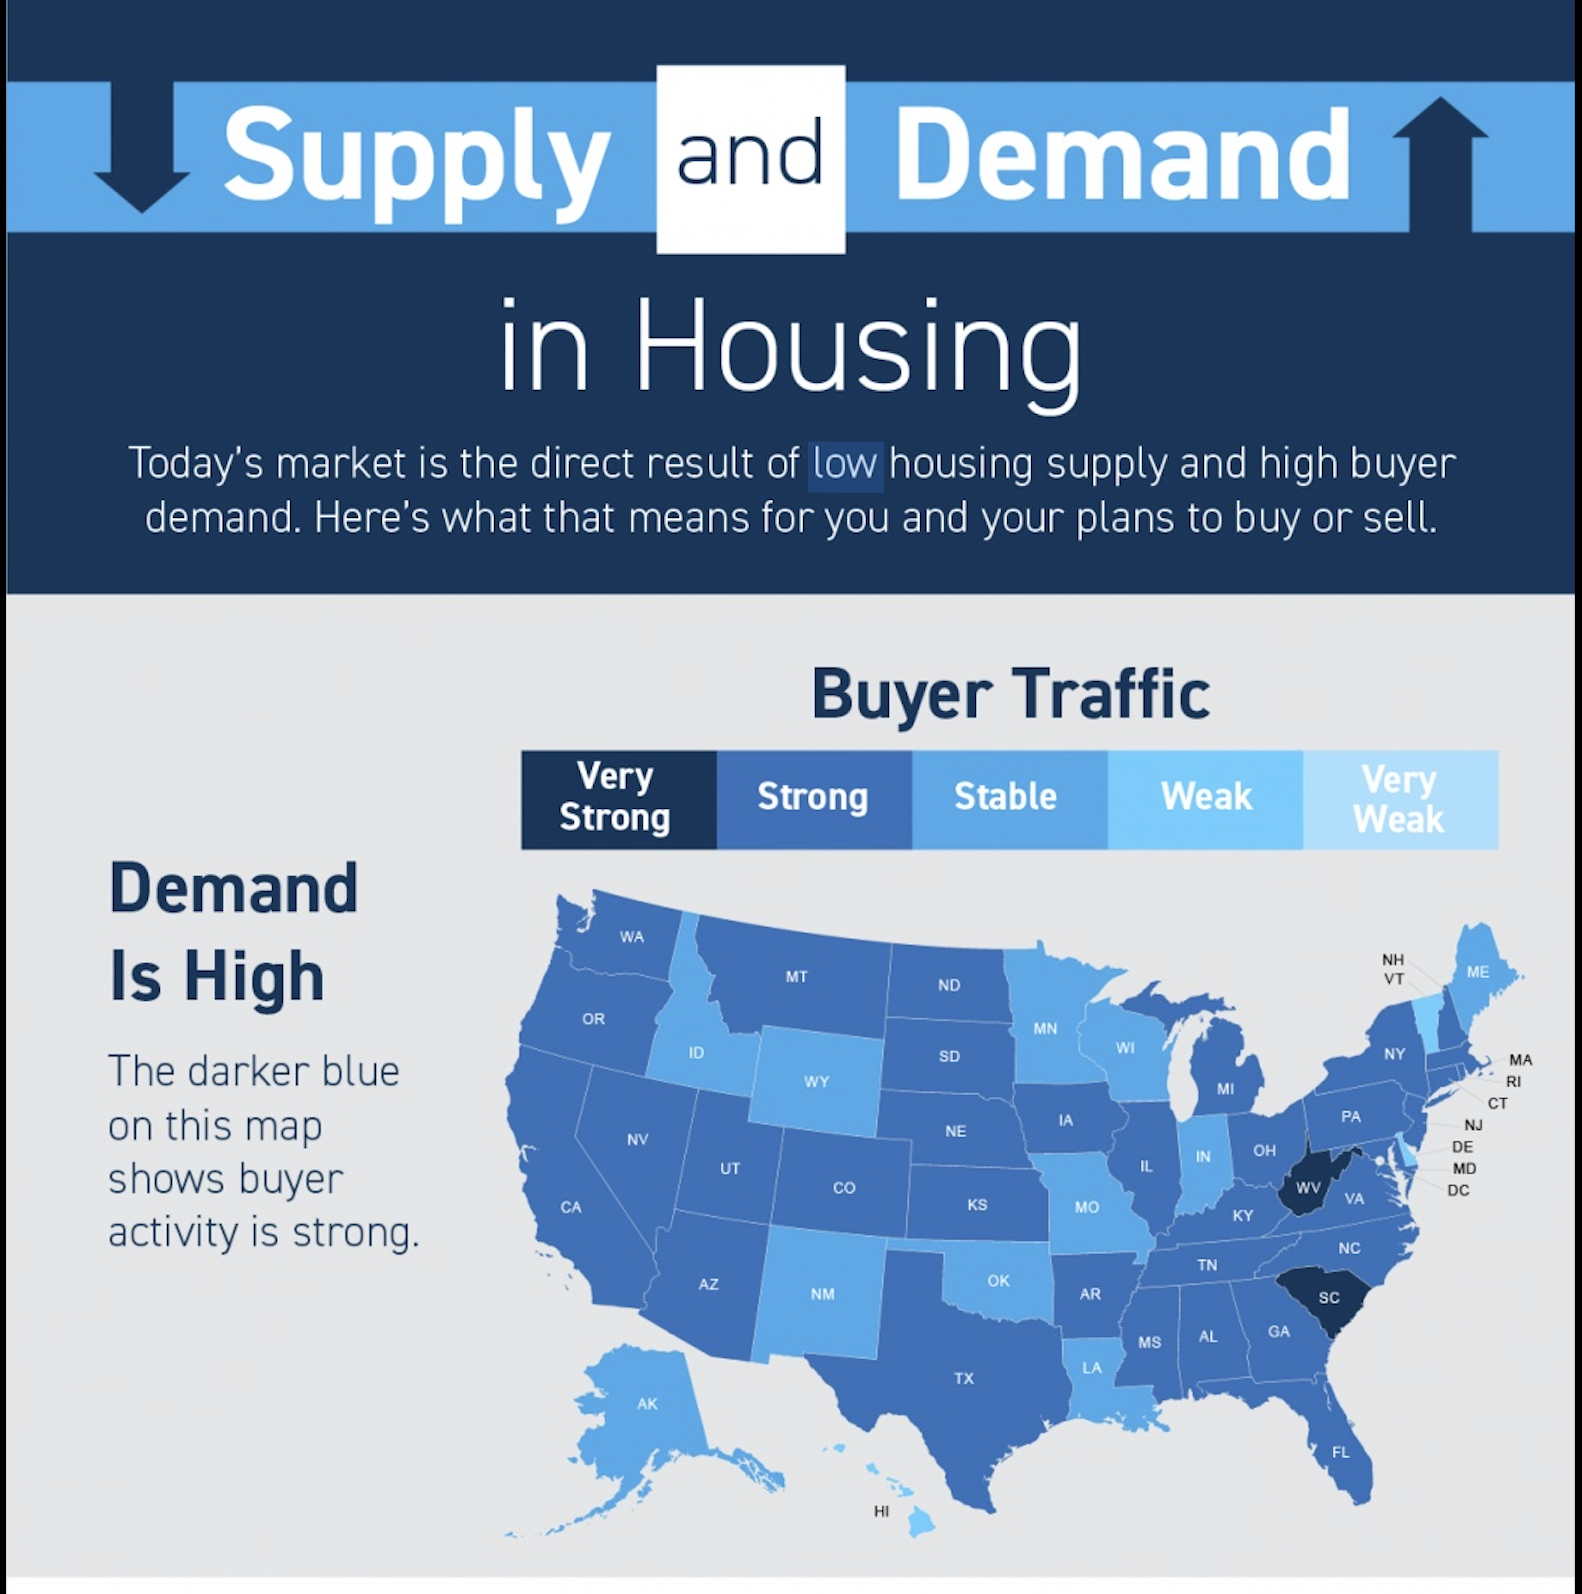 Supply and Demand in Today’s Market